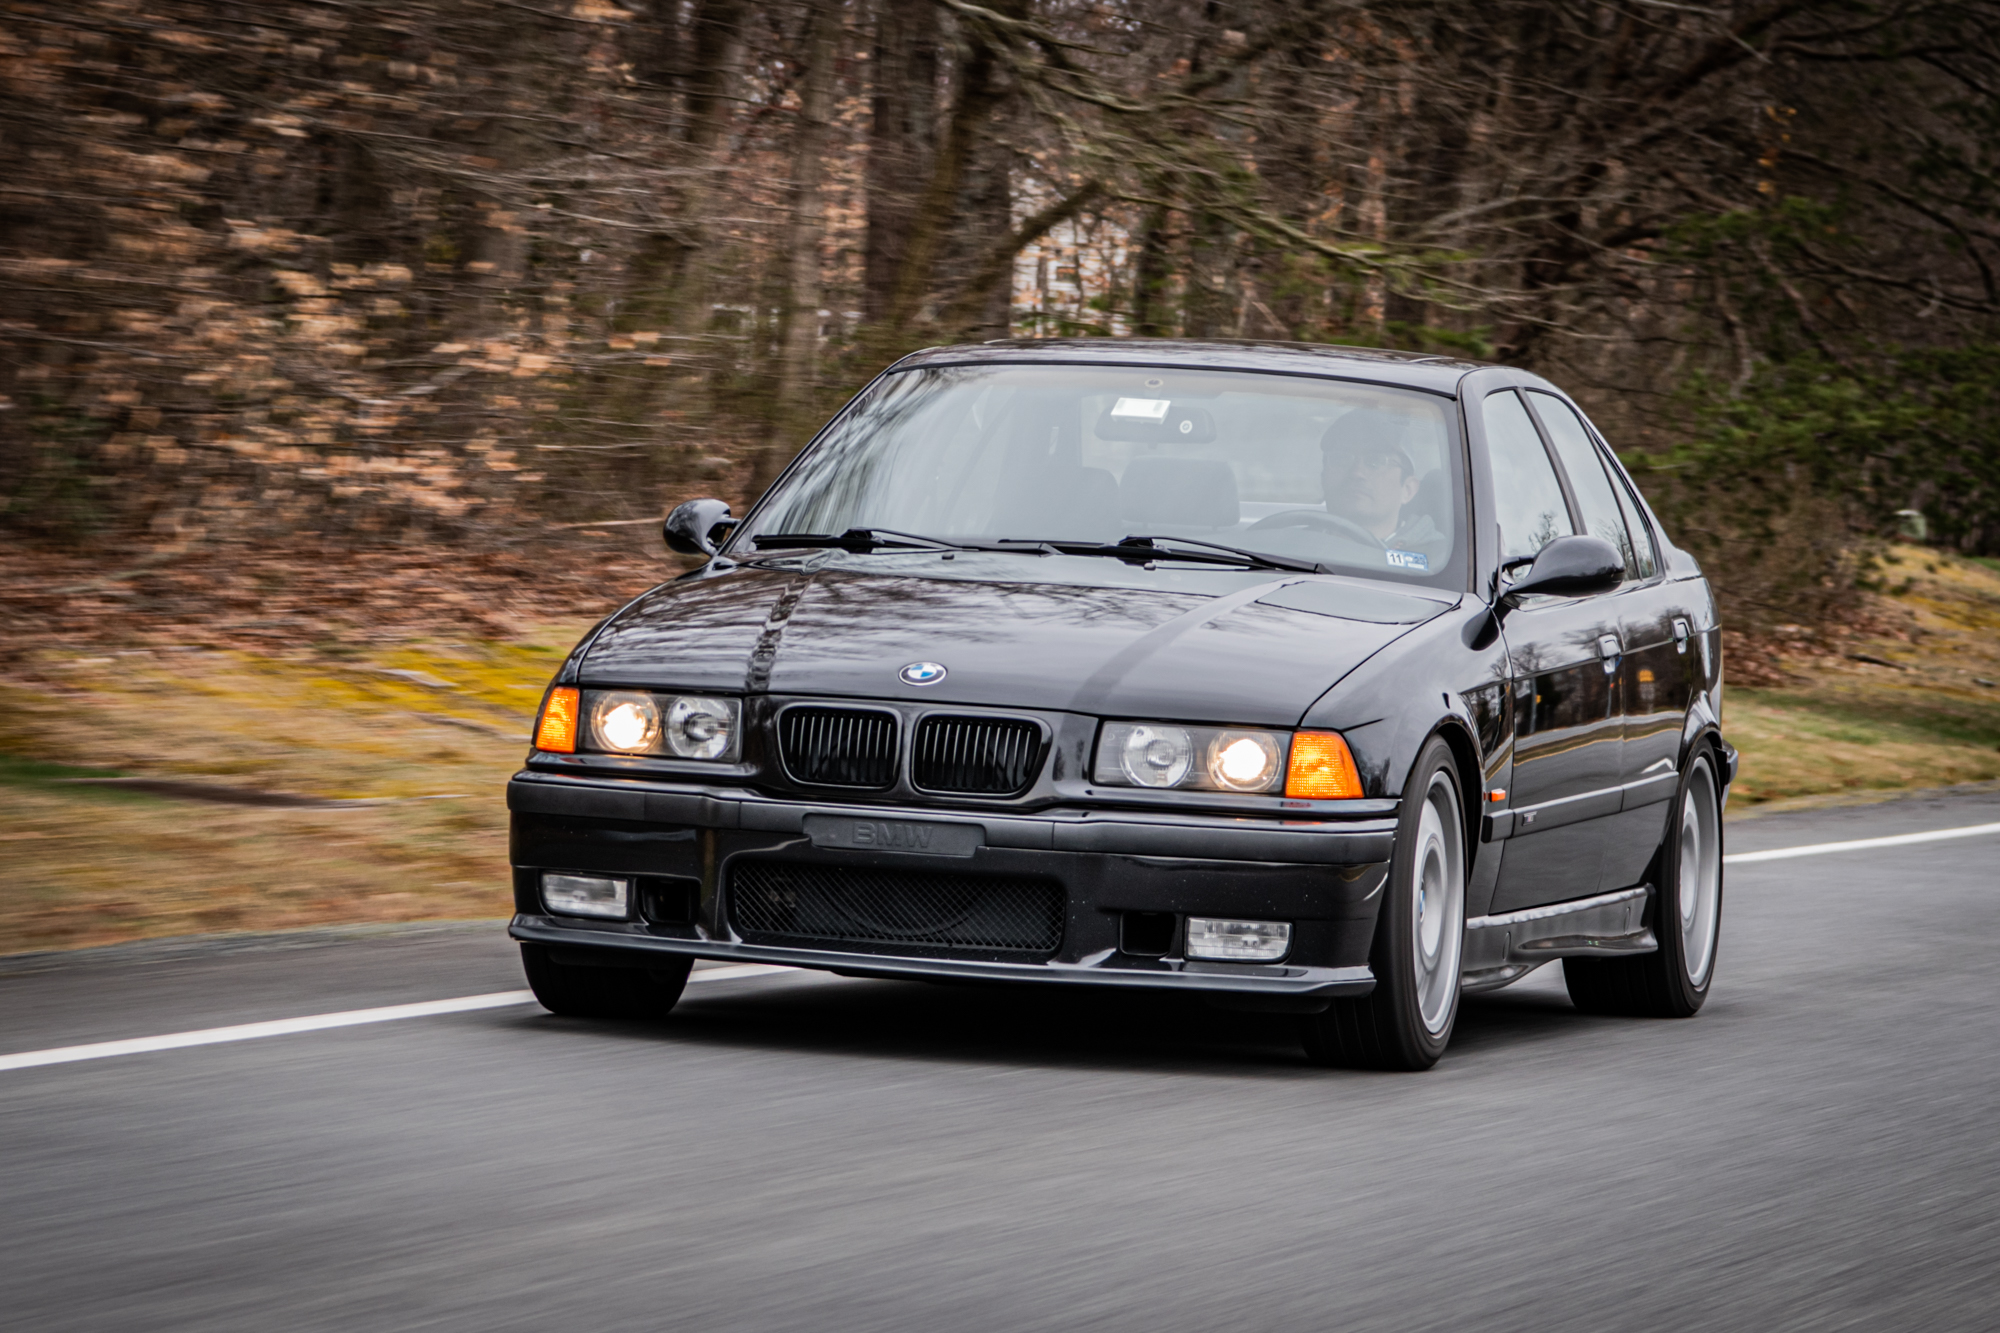 E36-Chassis BMW M3: Expert tips on buying, modifying and more